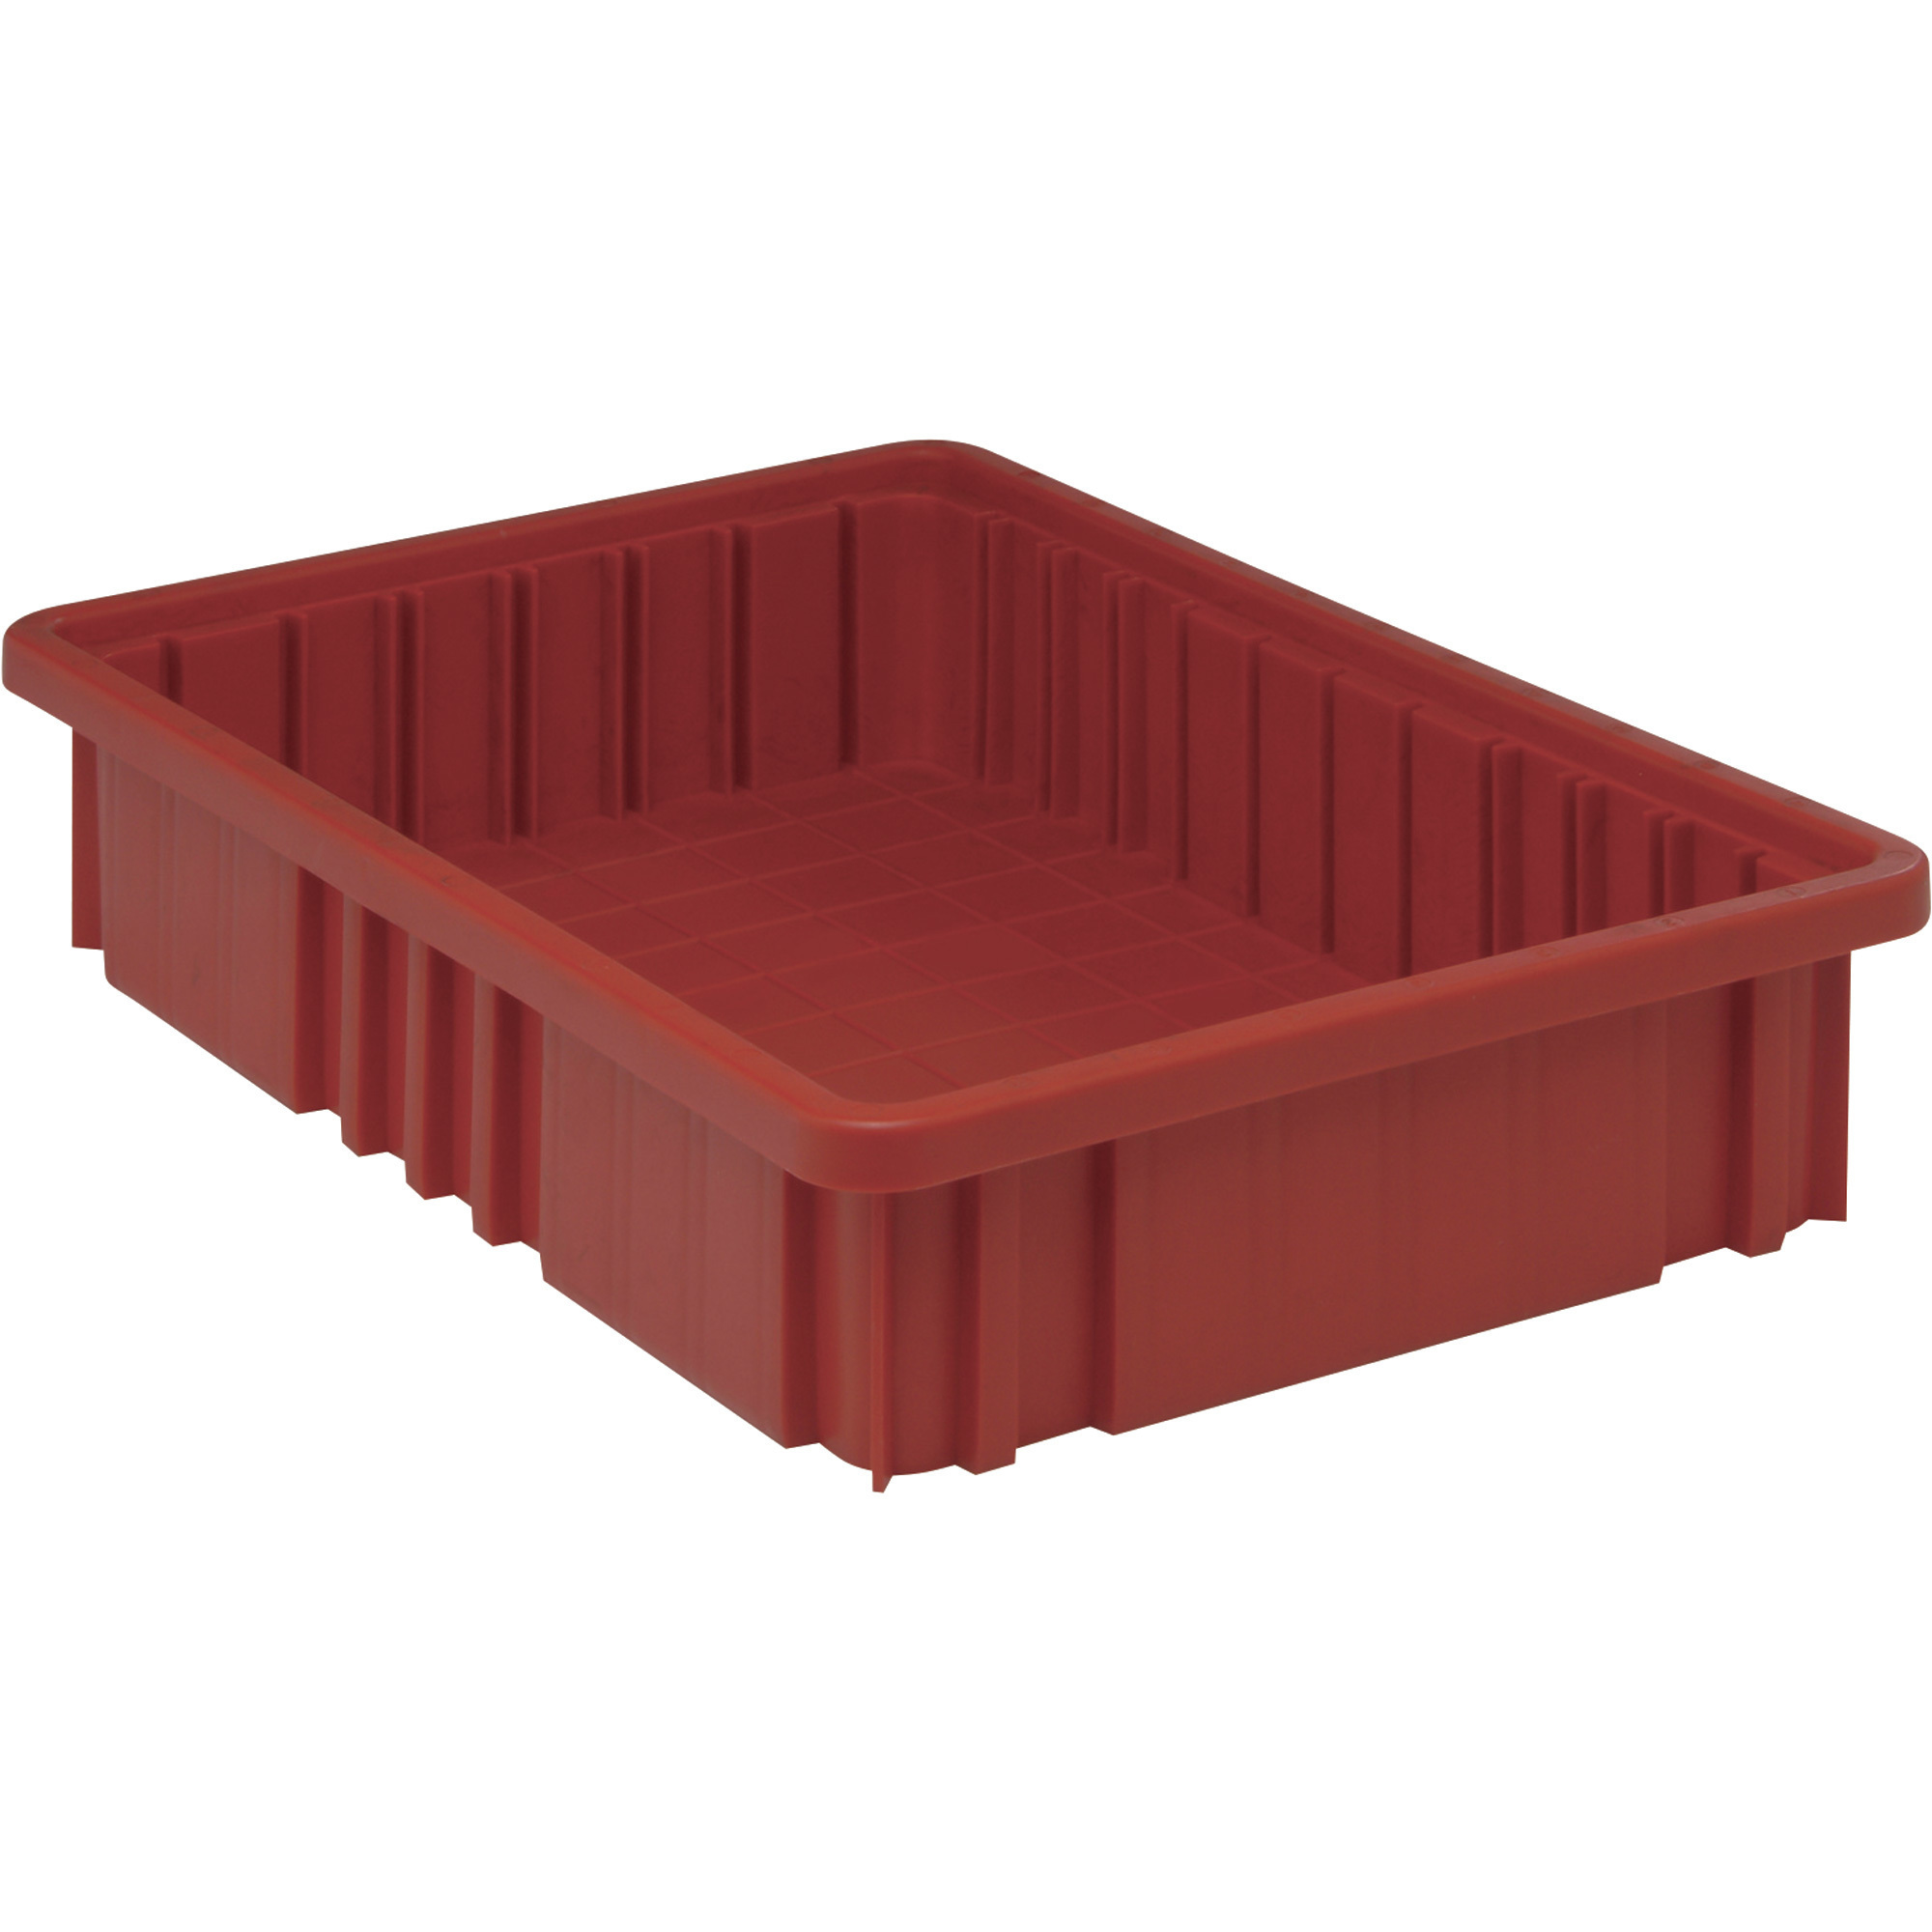 Quantum Storage Dividable Grid Container, 12-Pack, 16 1/2Inch L x 10 7/8Inch W x 3 1/2Inch H, Red, Model DG92035RD